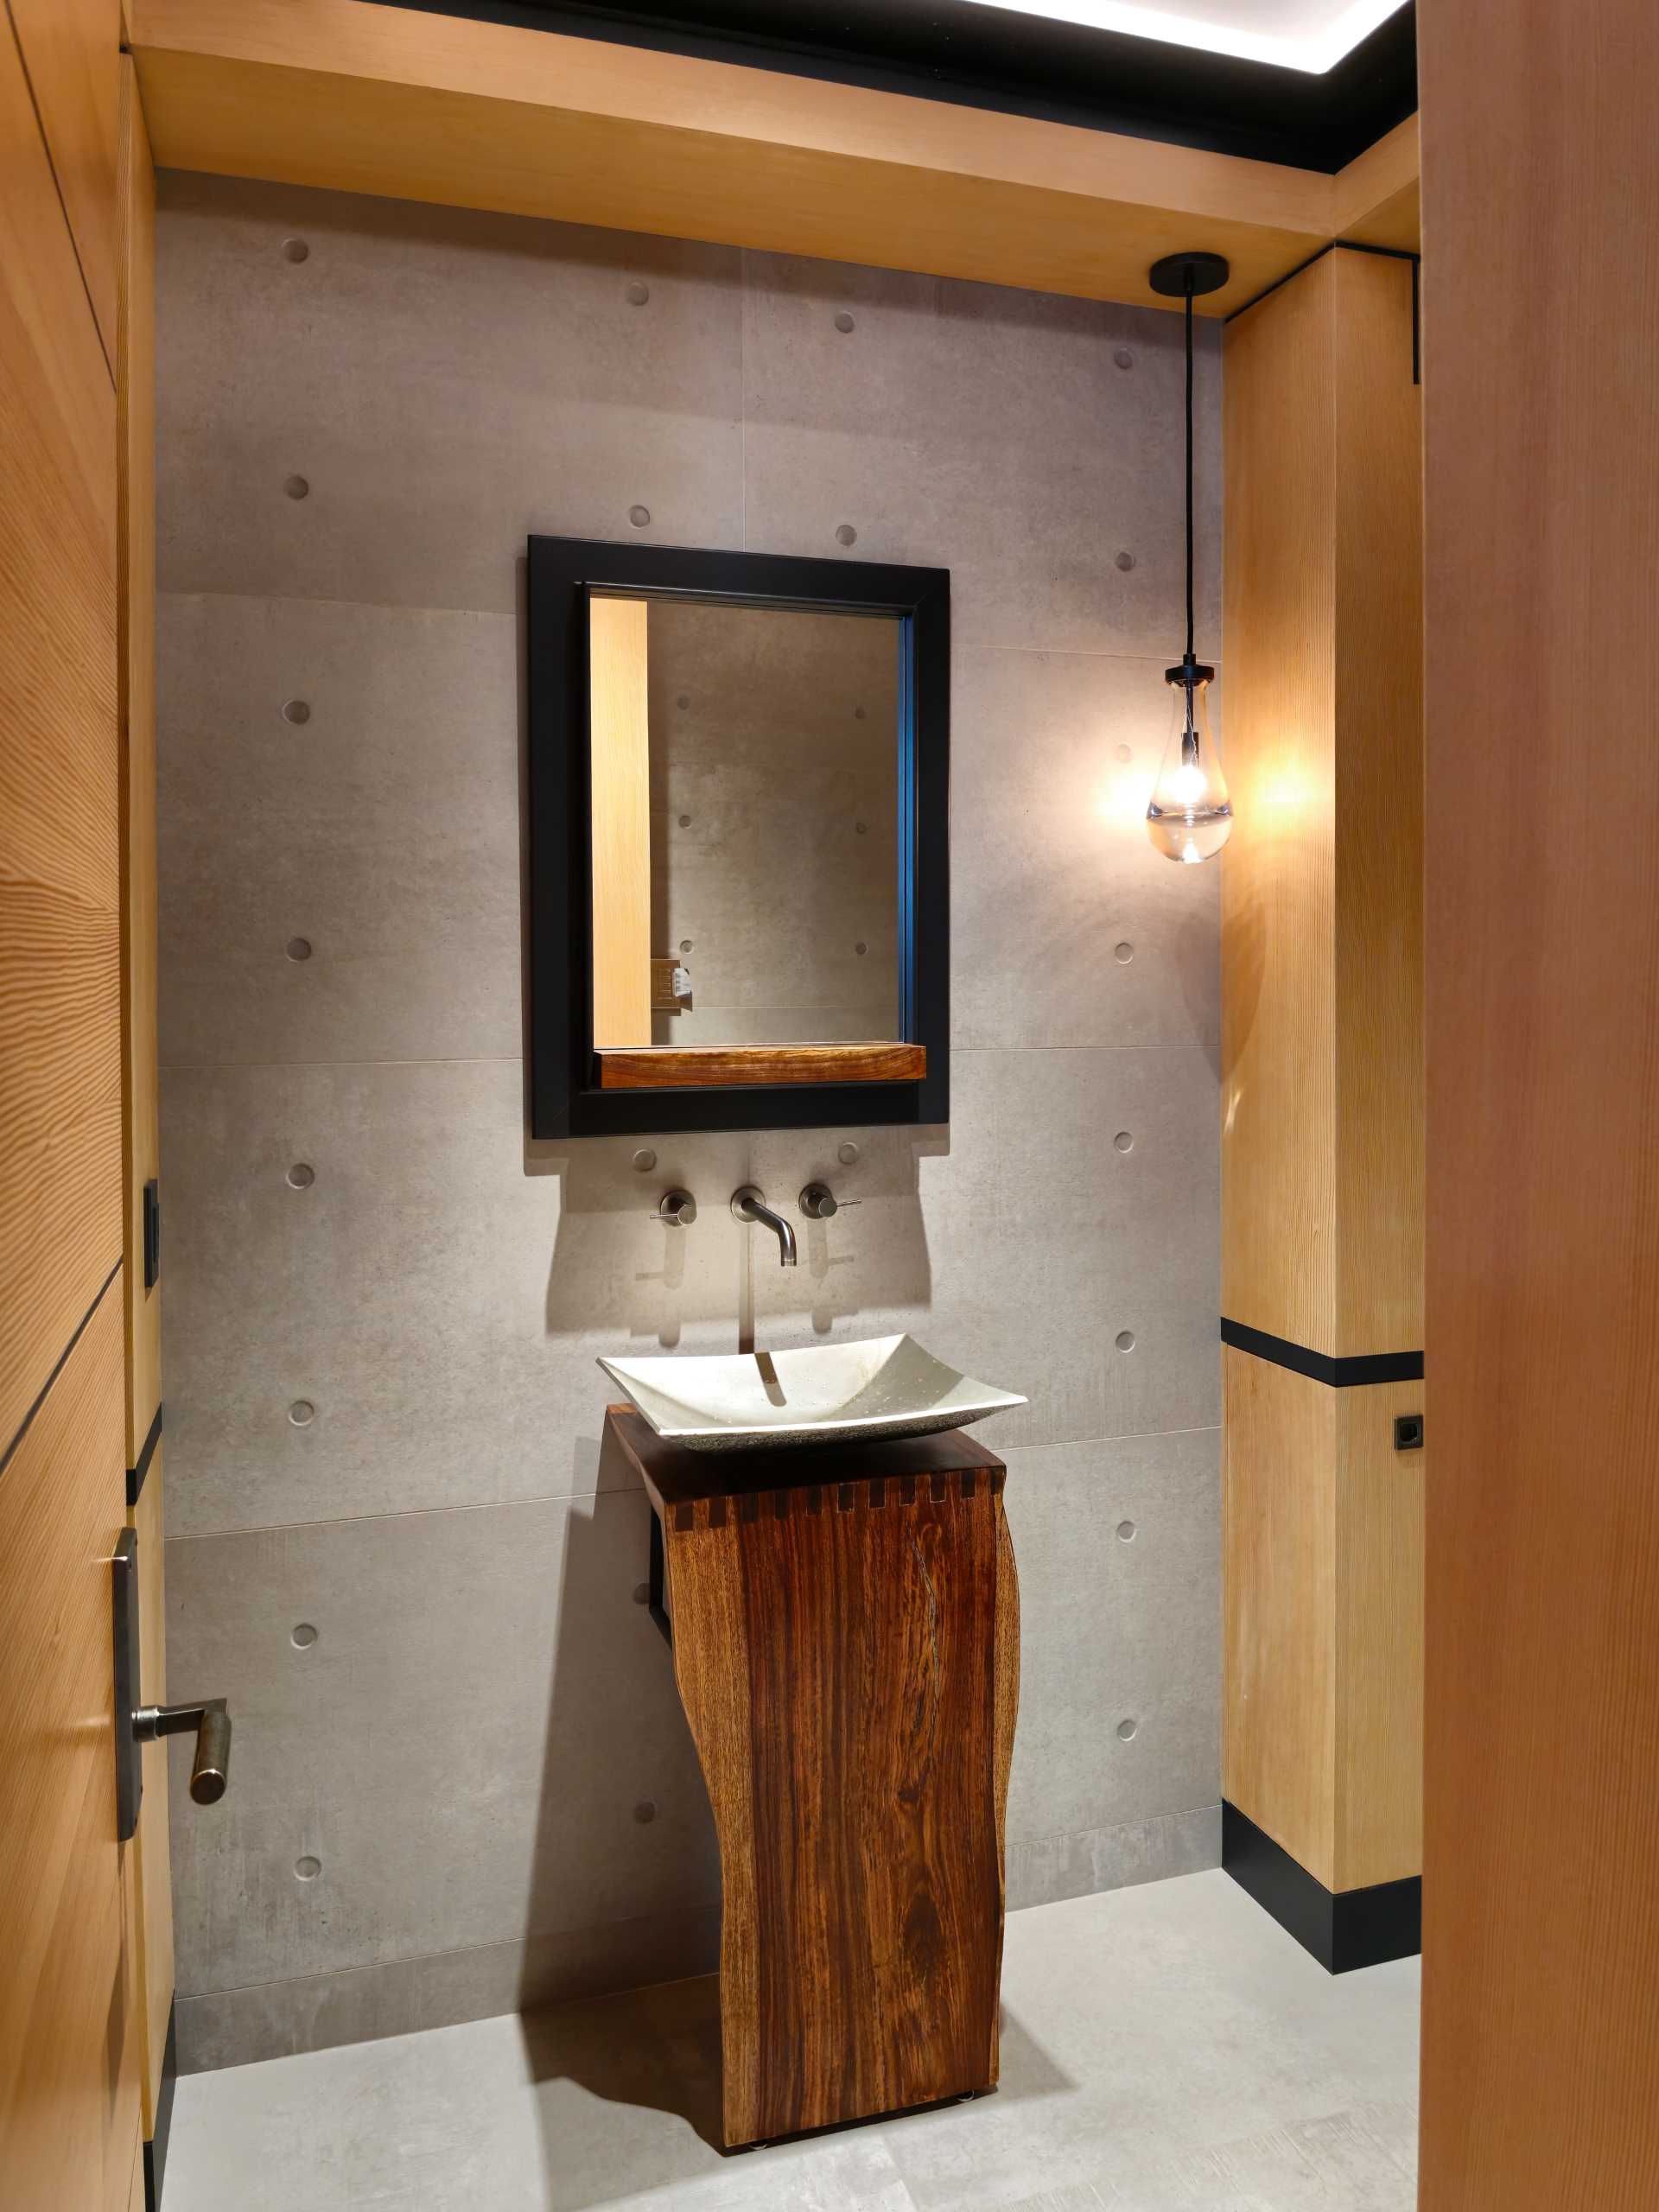 A modern powder room with the wood and steel structure on display.